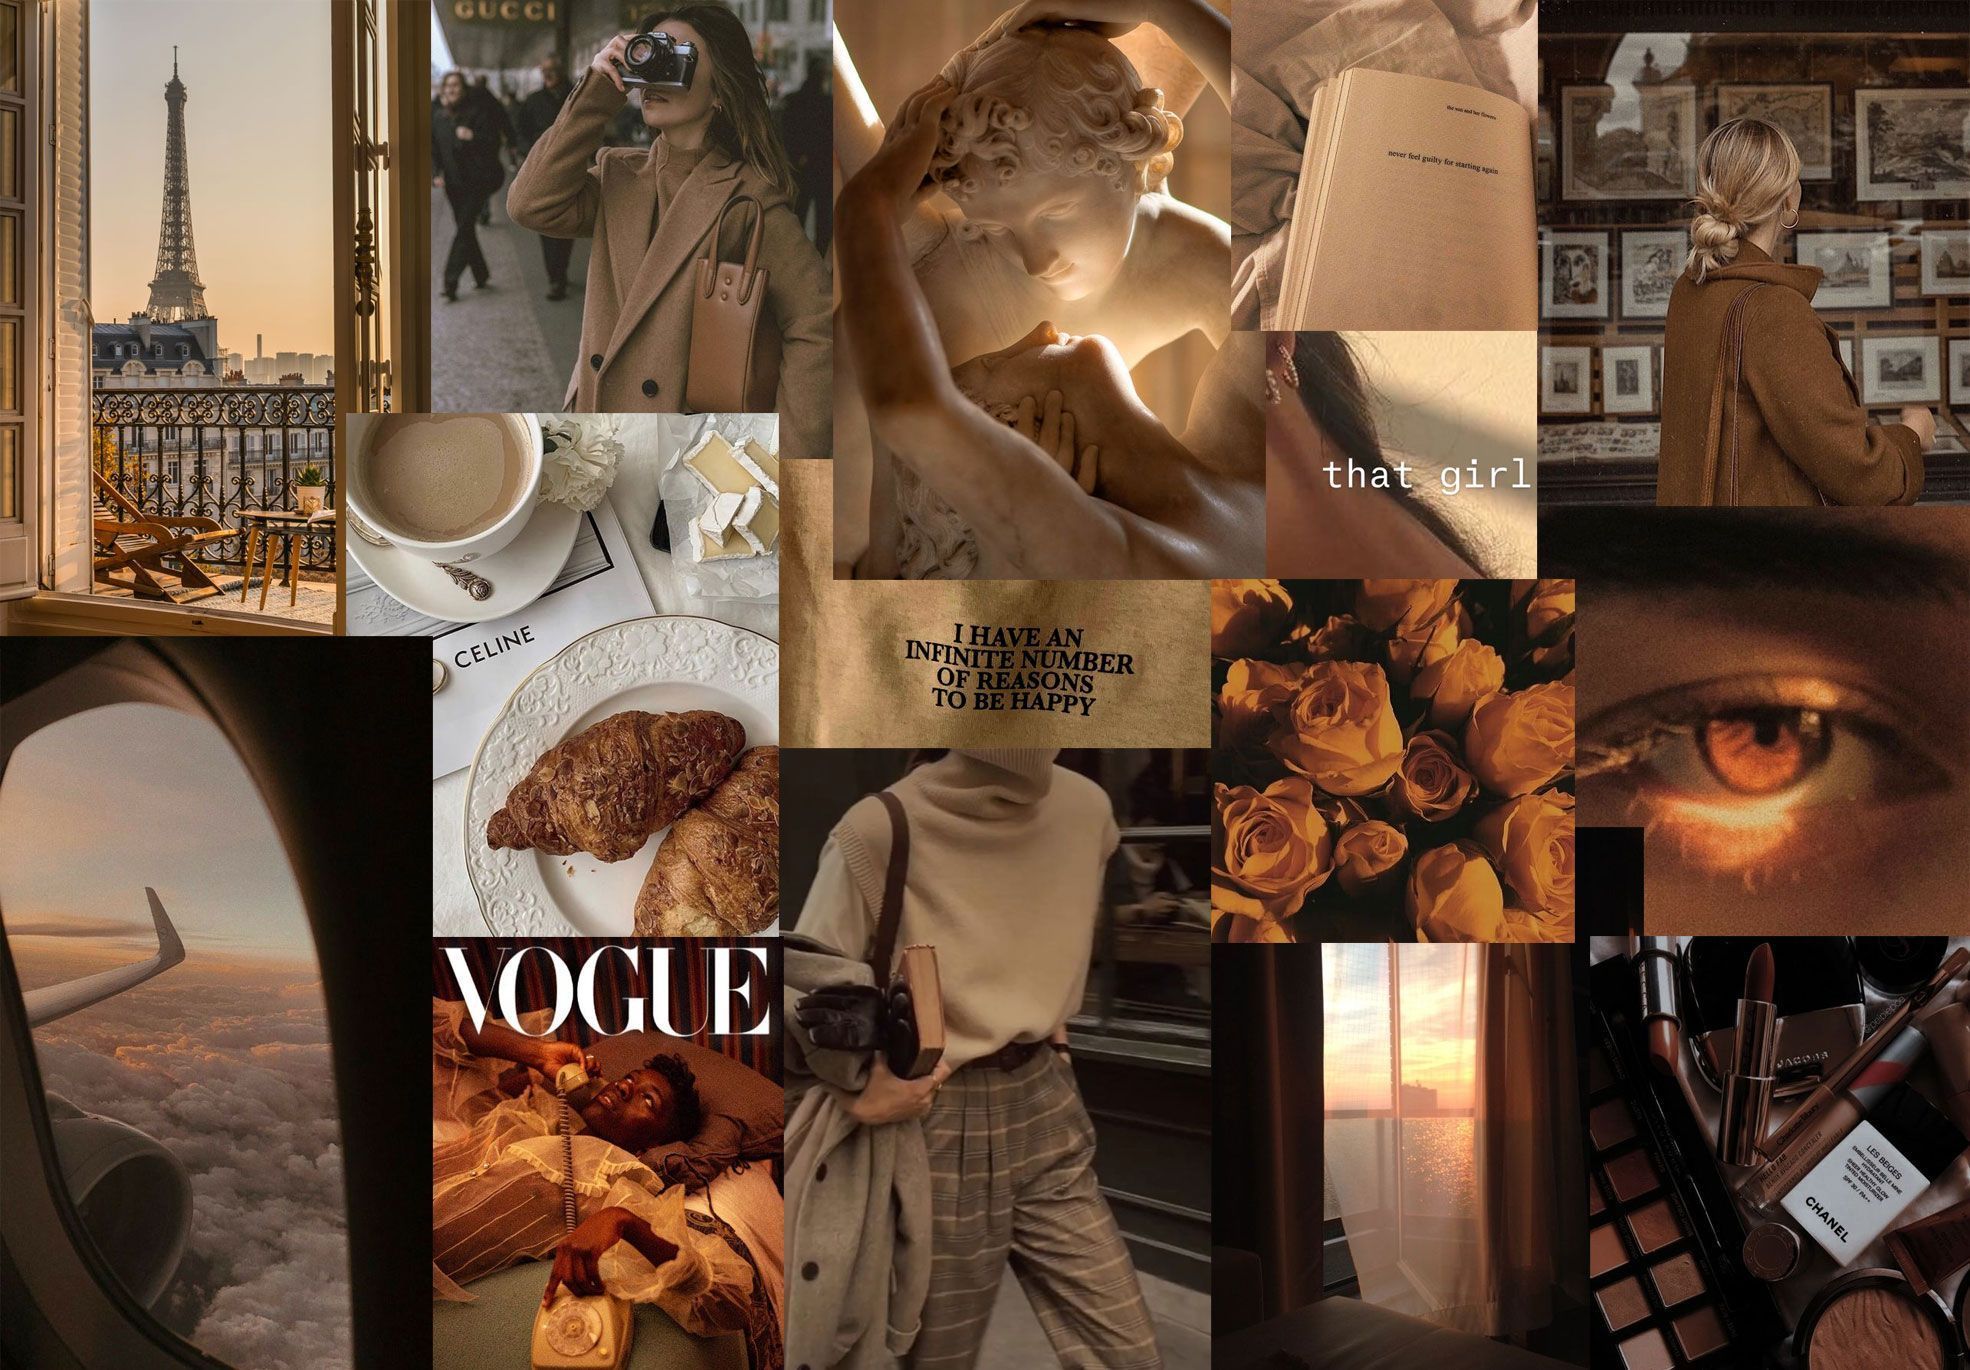 A collage of pictures with the word vogue in them - Brown, Paris, collage, Vogue, Gucci